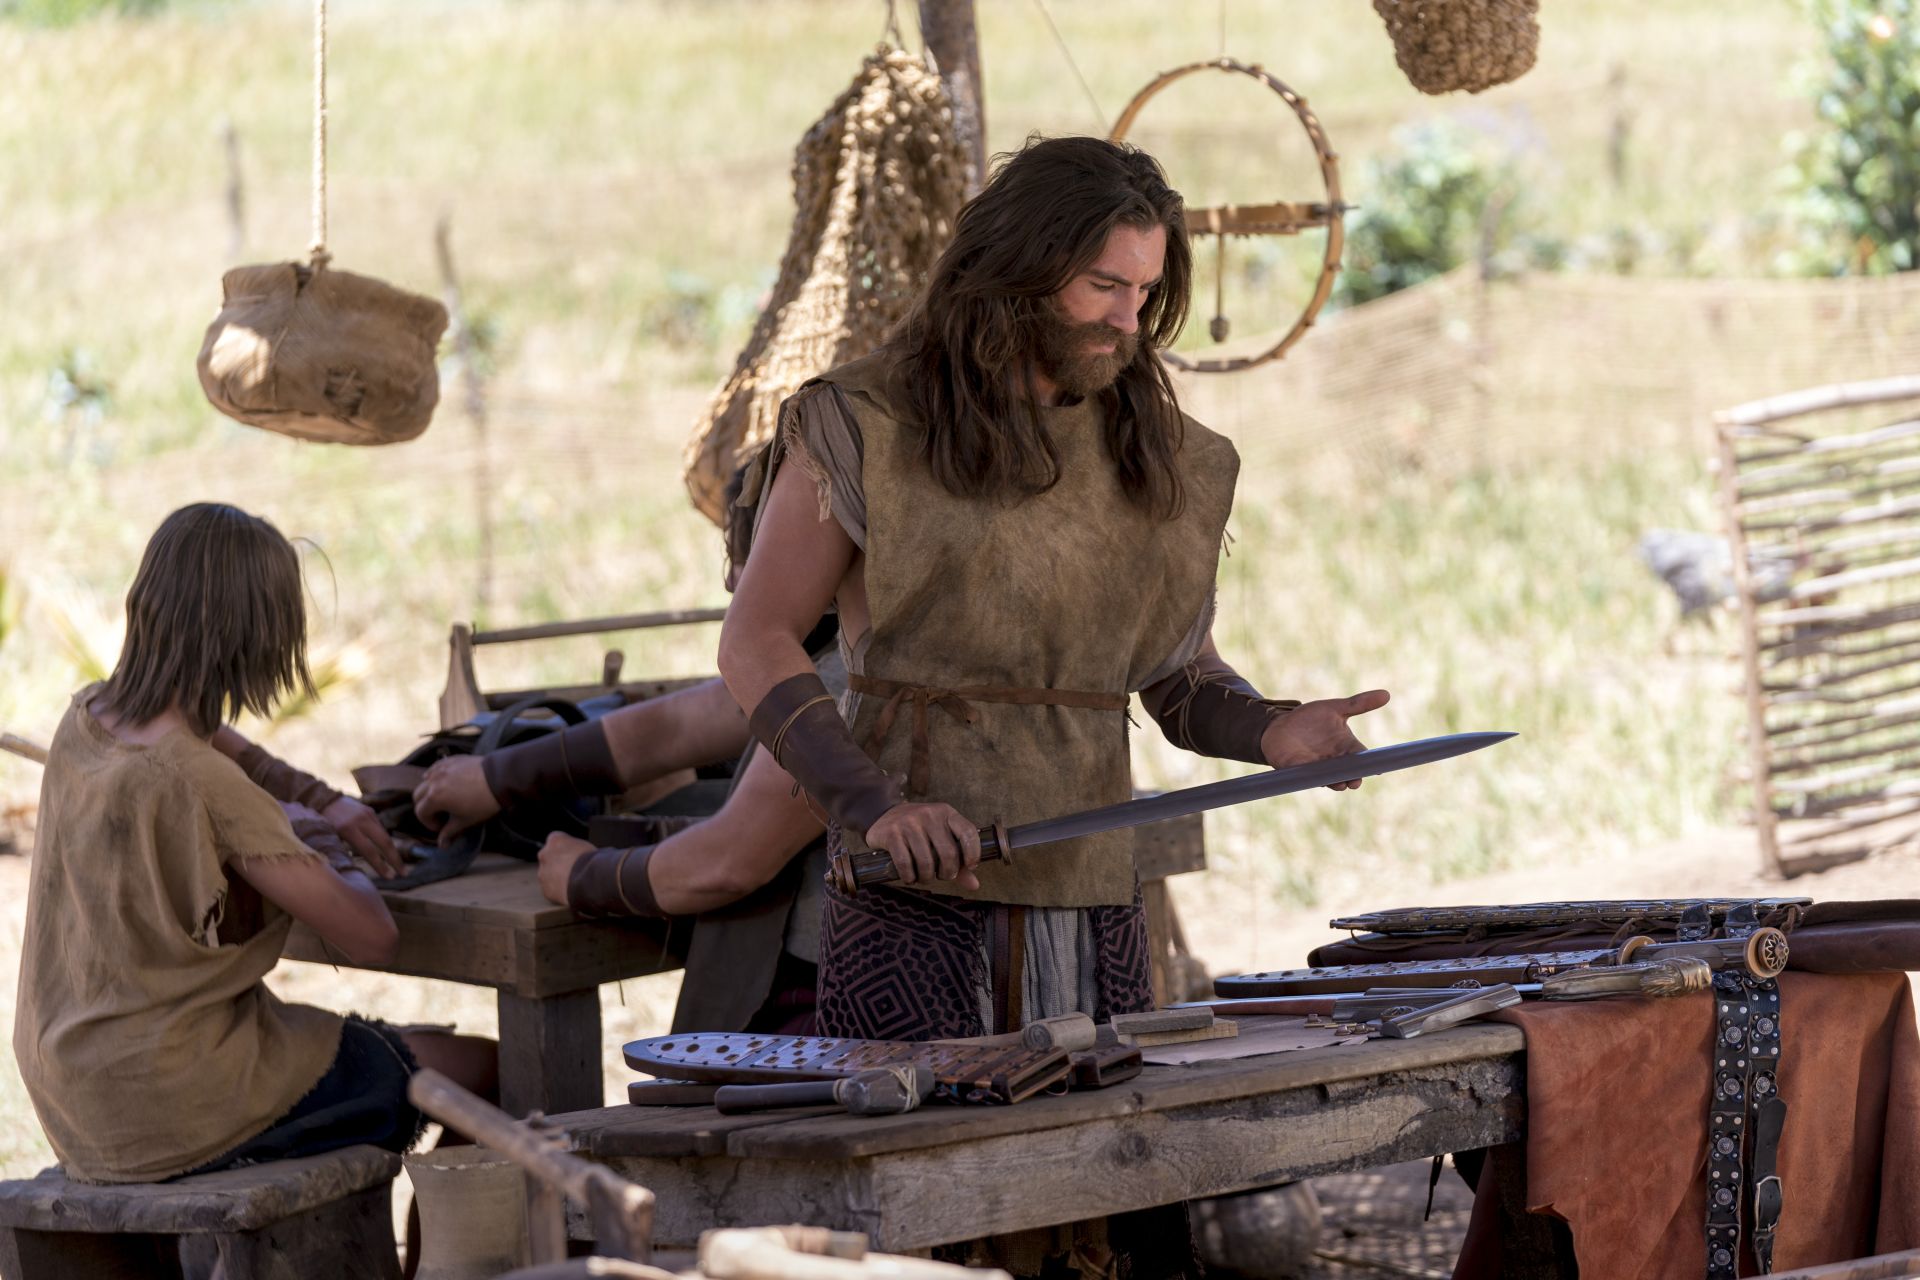 Nephi inspecting a sword and other weapons